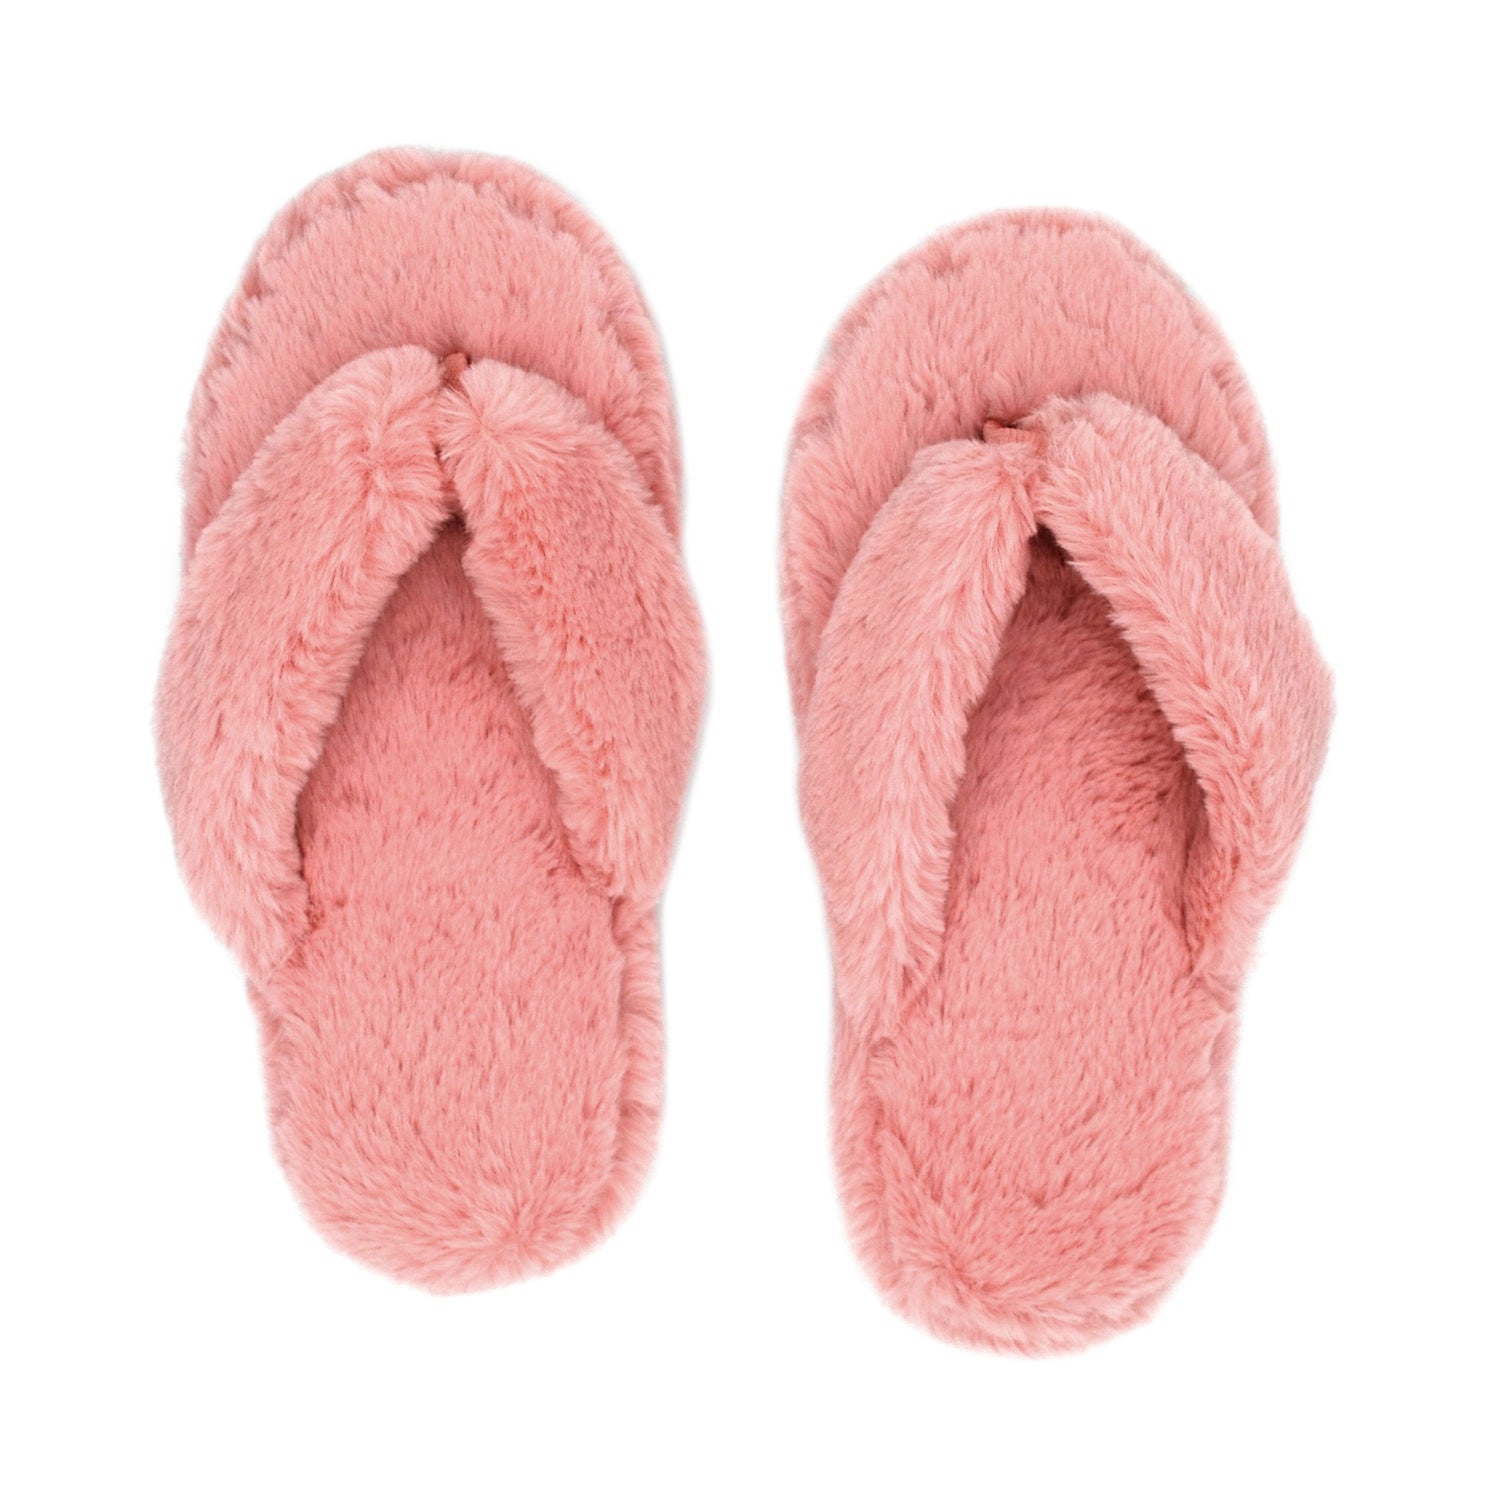 Pudus Fuzzy Flip Flop Thong Slippers for Women, House Slippers with Memory Foam Insoles and Ultra-Plush Faux Fur Lining Blush Pink Cottontail Flip Flop Slippers